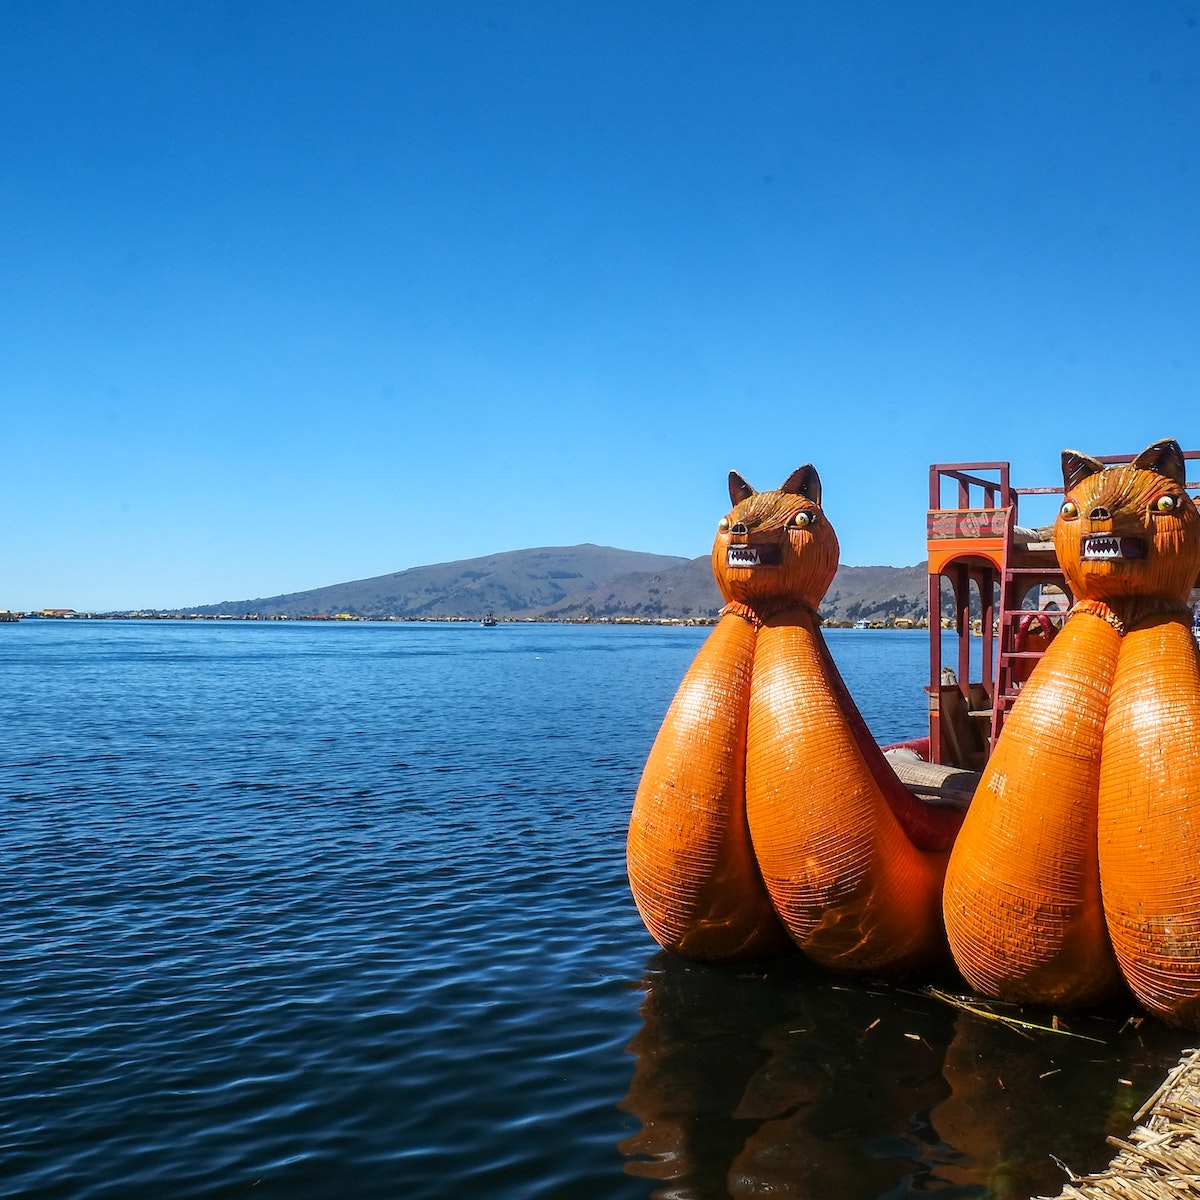 nScenery when walking around Amantaní­ Island on Lake Titicaca on the border between Peru and Bolivia in South America.